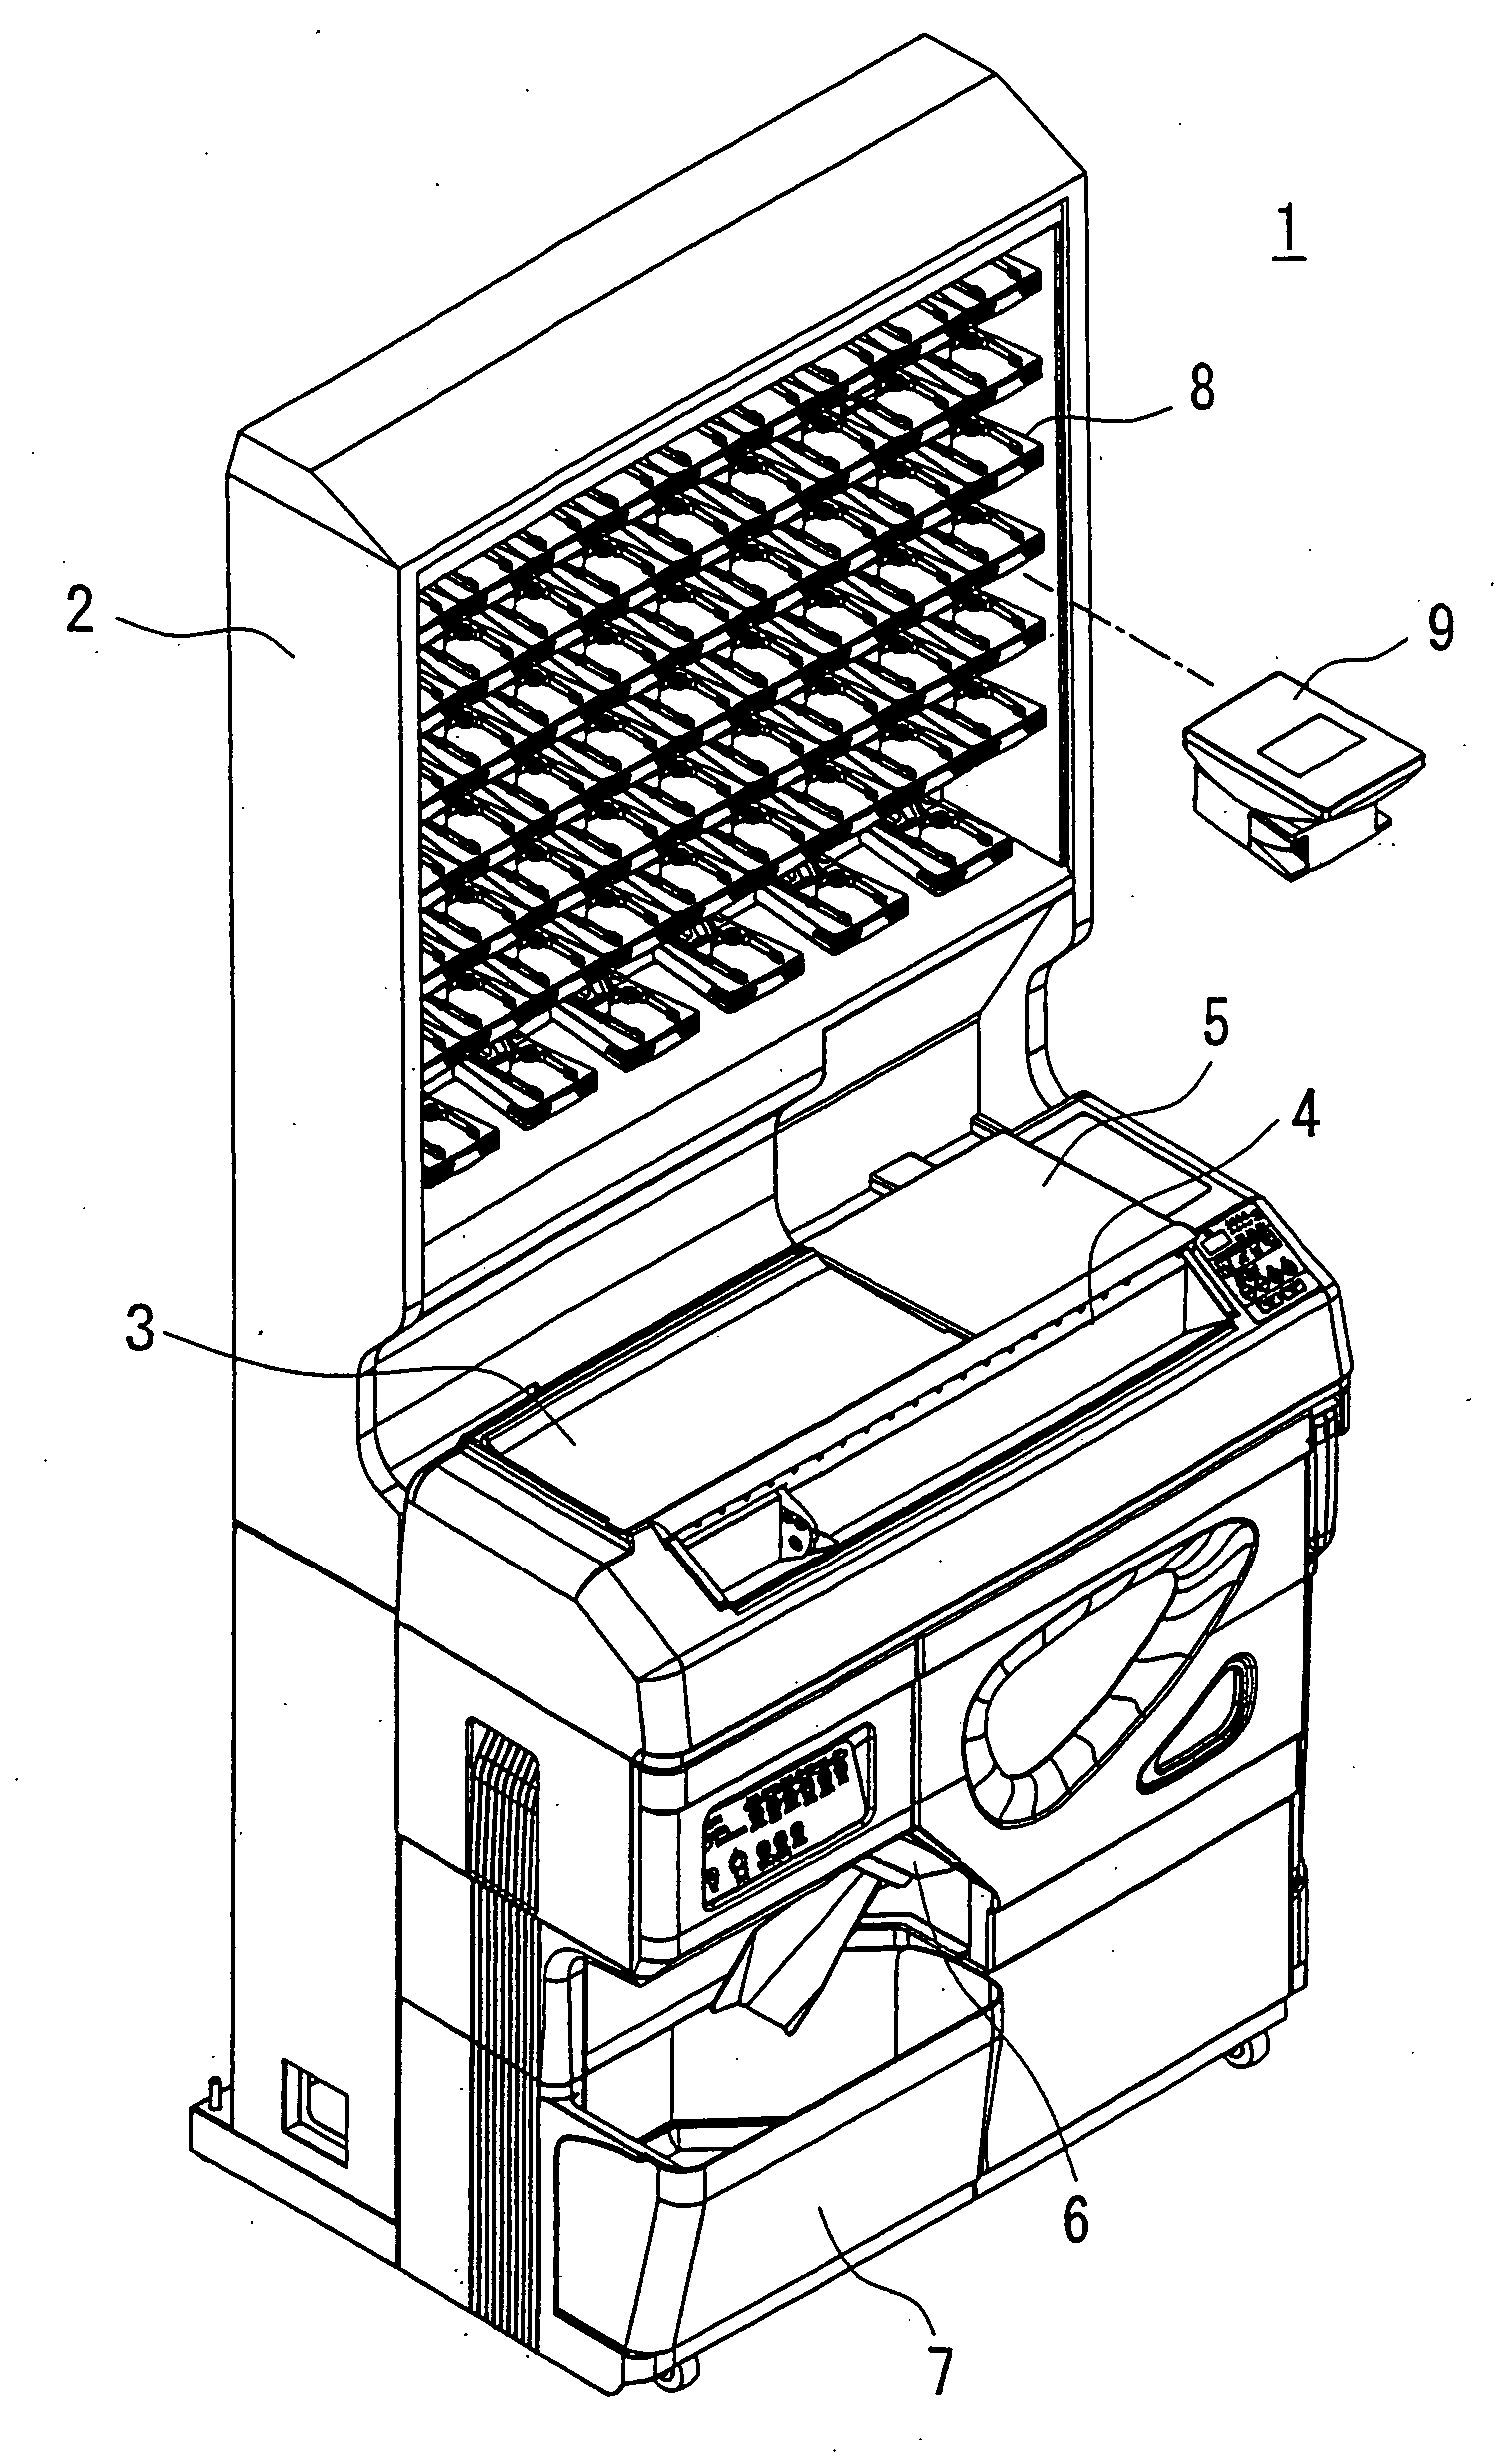 Tablet packaging device